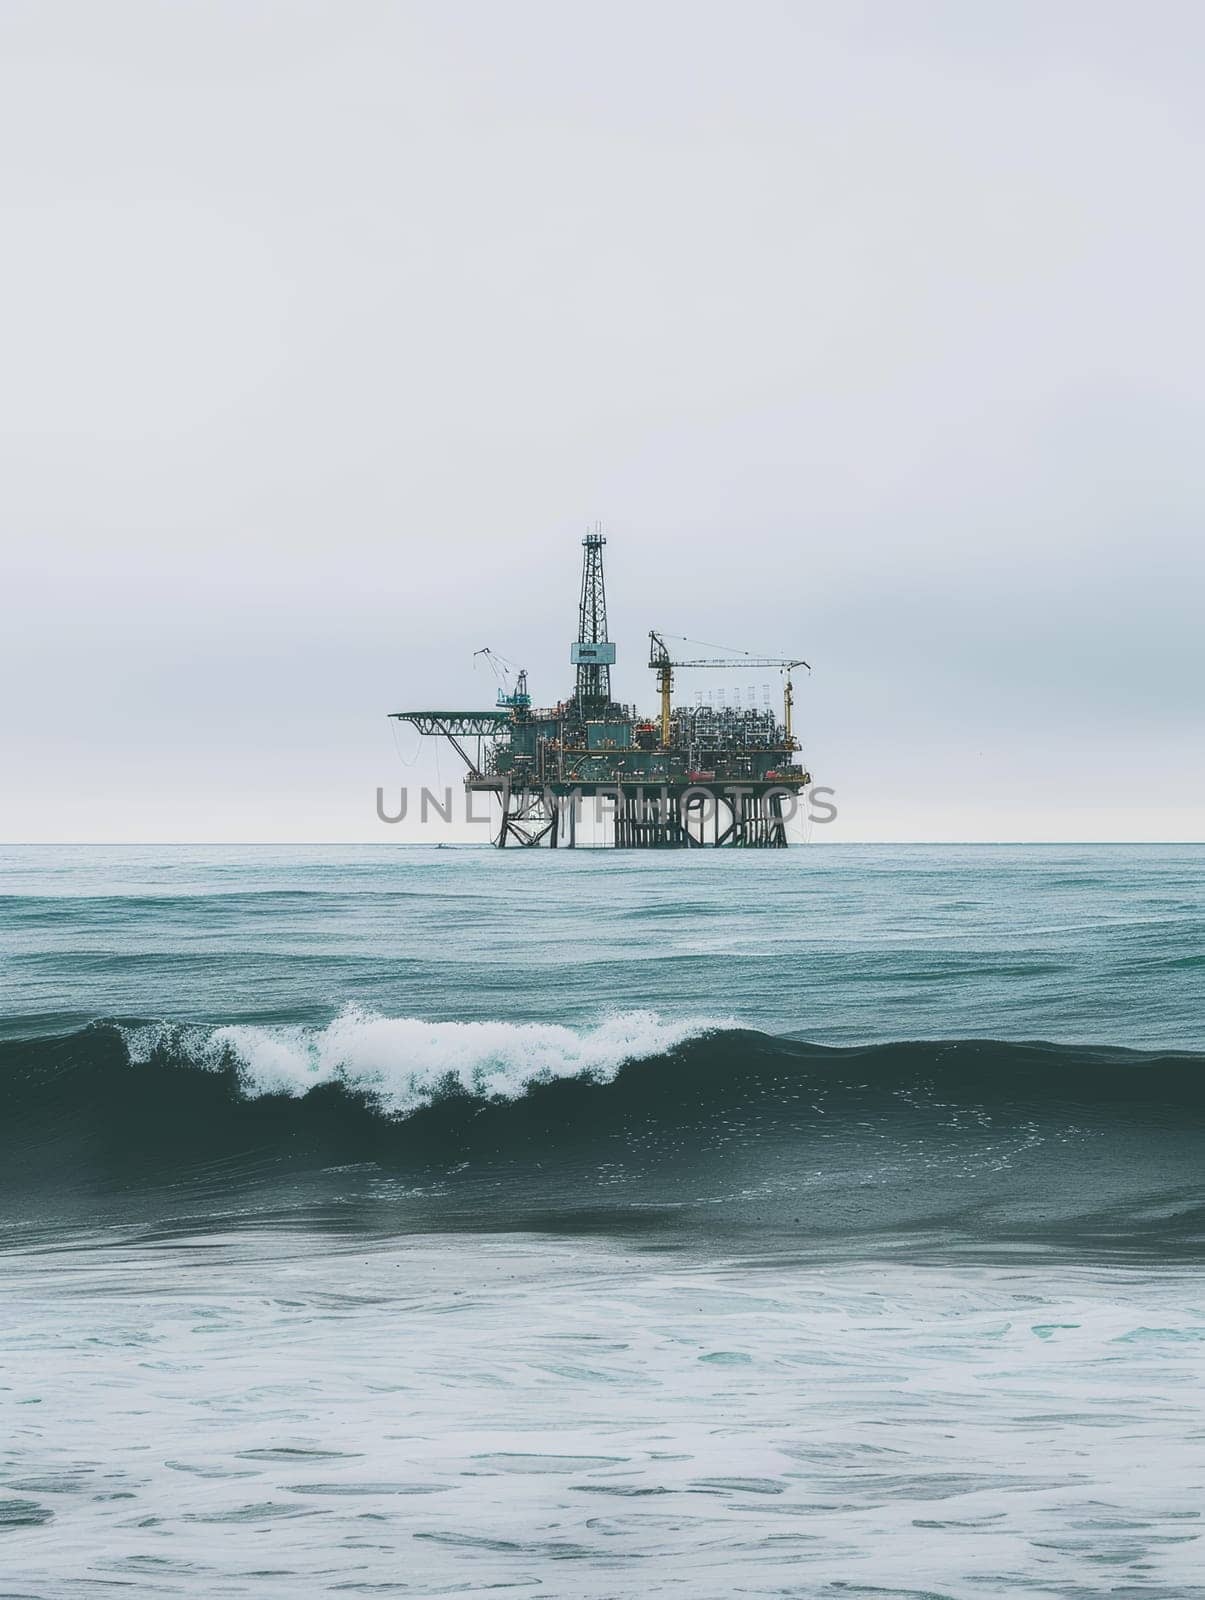 An offshore oil platform stands in stark contrast to the calm sea, with waves gently breaking in the foreground under an overcast sky